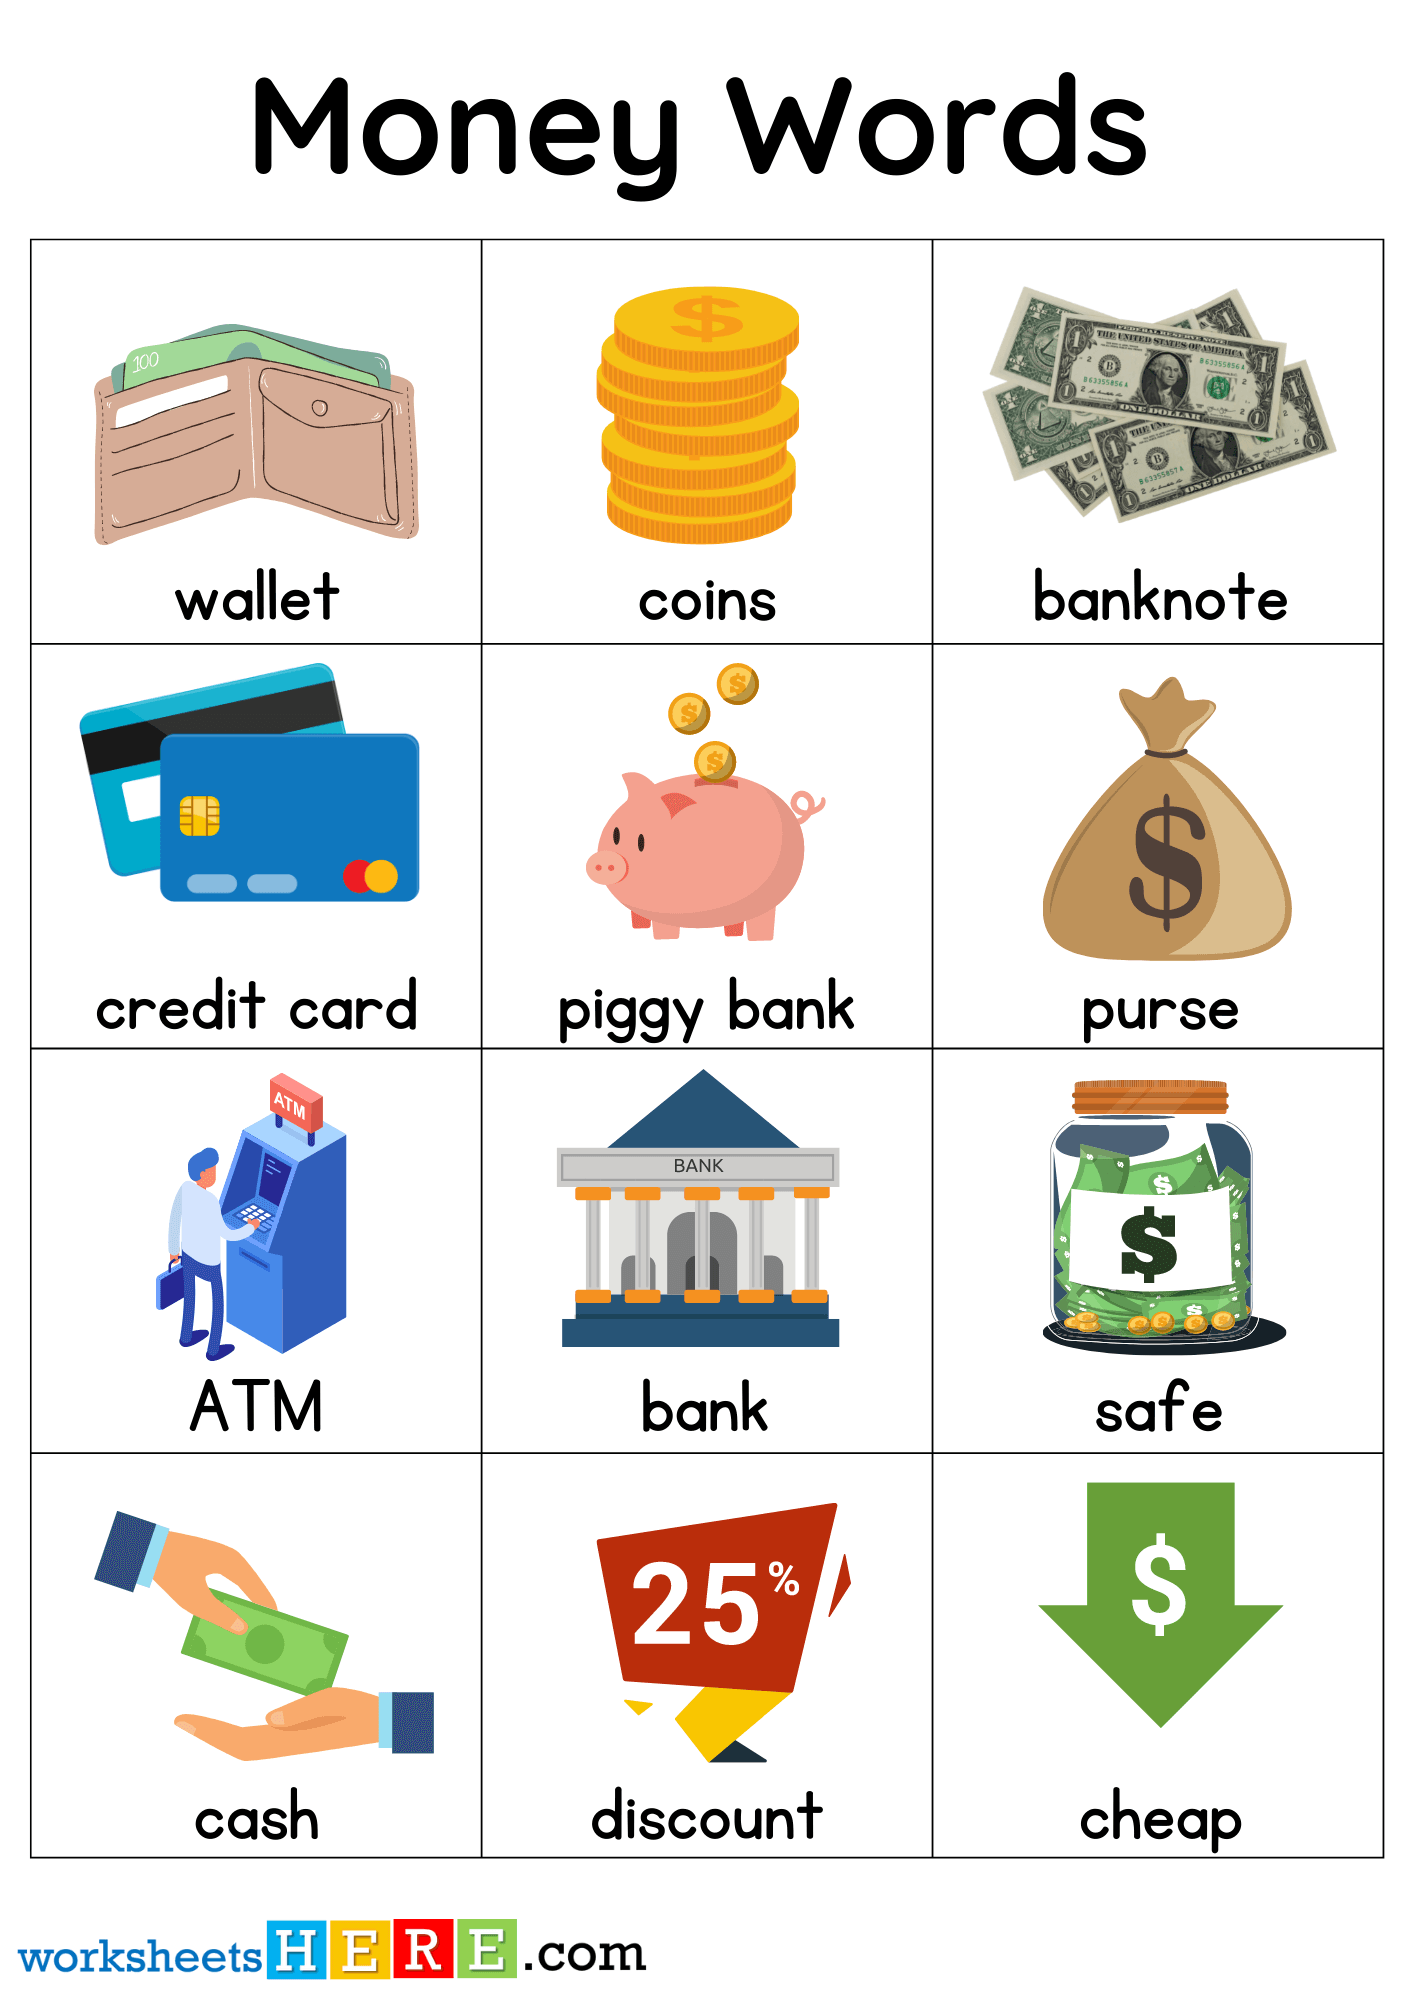 Money Related Words with Pictures, Kids Money Vocabulary Flashcards PDF Worksheets For Students